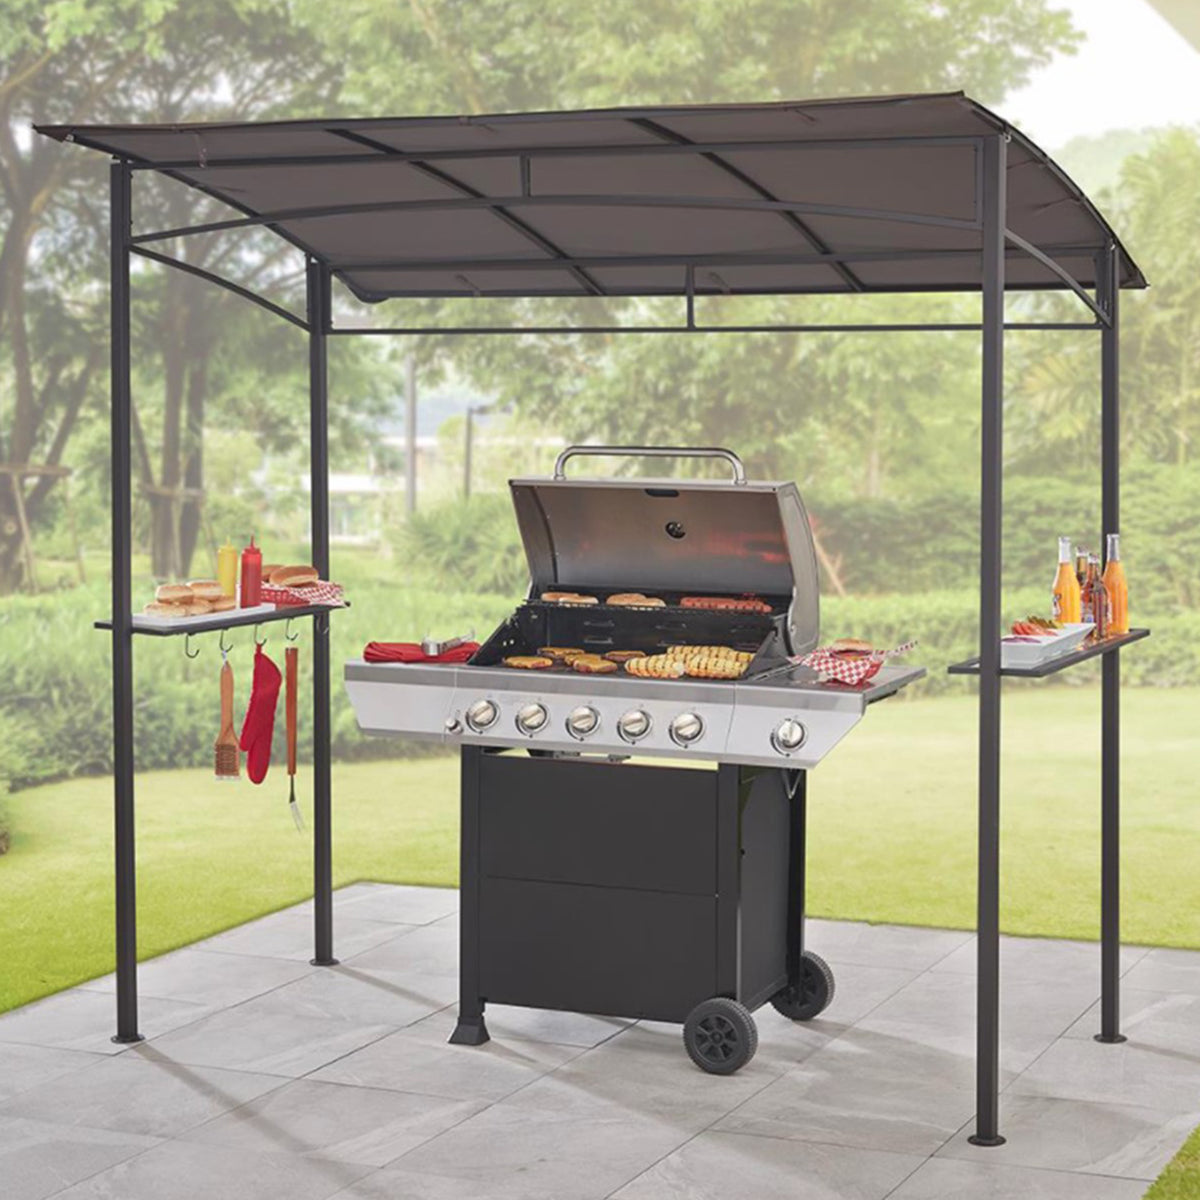 Bliss Outdoors 85” BBQ Grill Gazebo Canopy with Serving Shelf and steel frame covering a grill that is cooking food. There are buns, condiments, and drinks sitting on the shelves that are built-in on the sides.